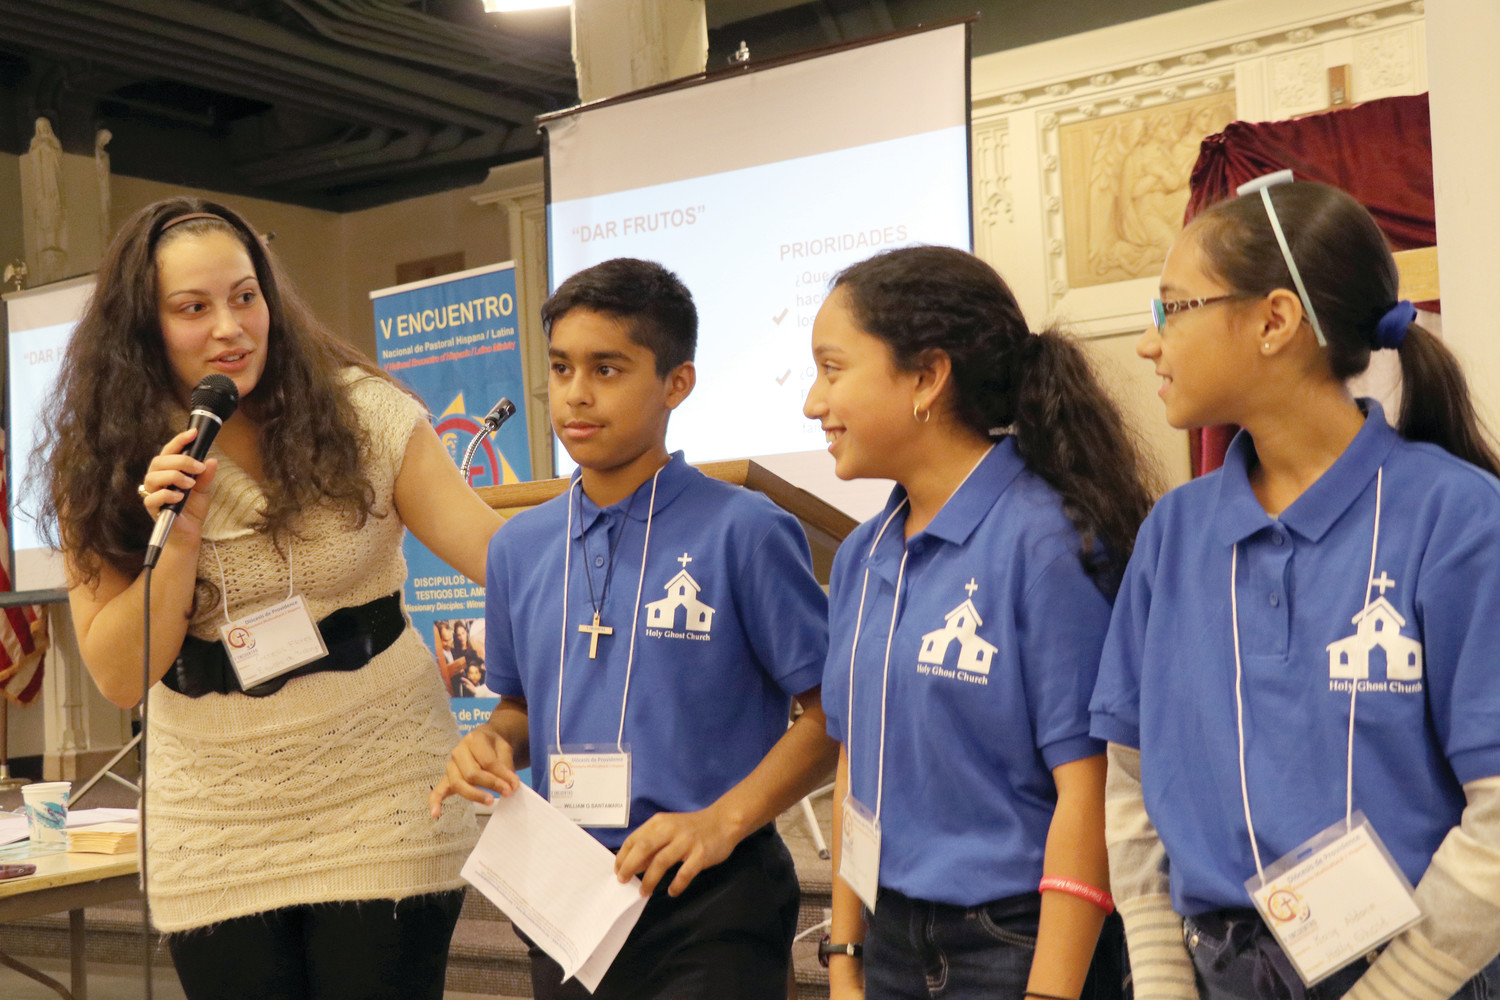 Genesis Flores, of the diocesan Office of Immigration, speaks with some young people from Holy Ghost Church about their hopes and dreams during the Diocesan Encuentro. With Flores from left are: William Santamaria, Juana Carrera and Keisy Aldana.